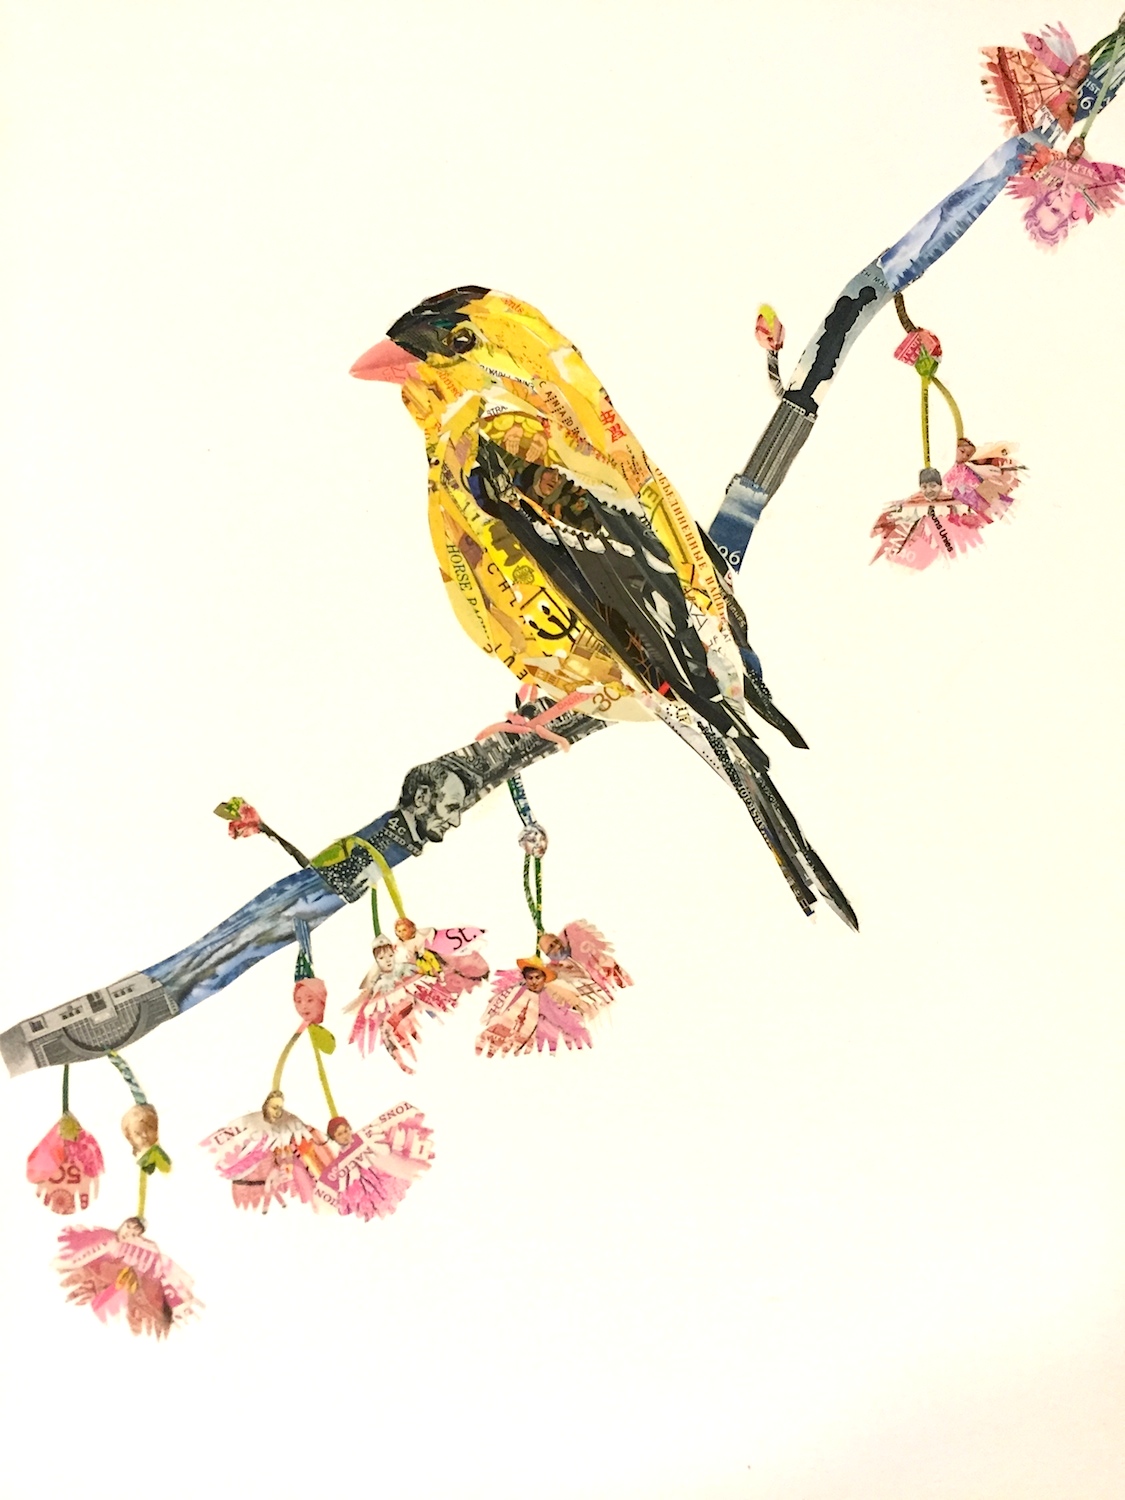 Kerry Buchman, American Goldfinch, 2015. Postage stamps on paper, 12 x 9 in.